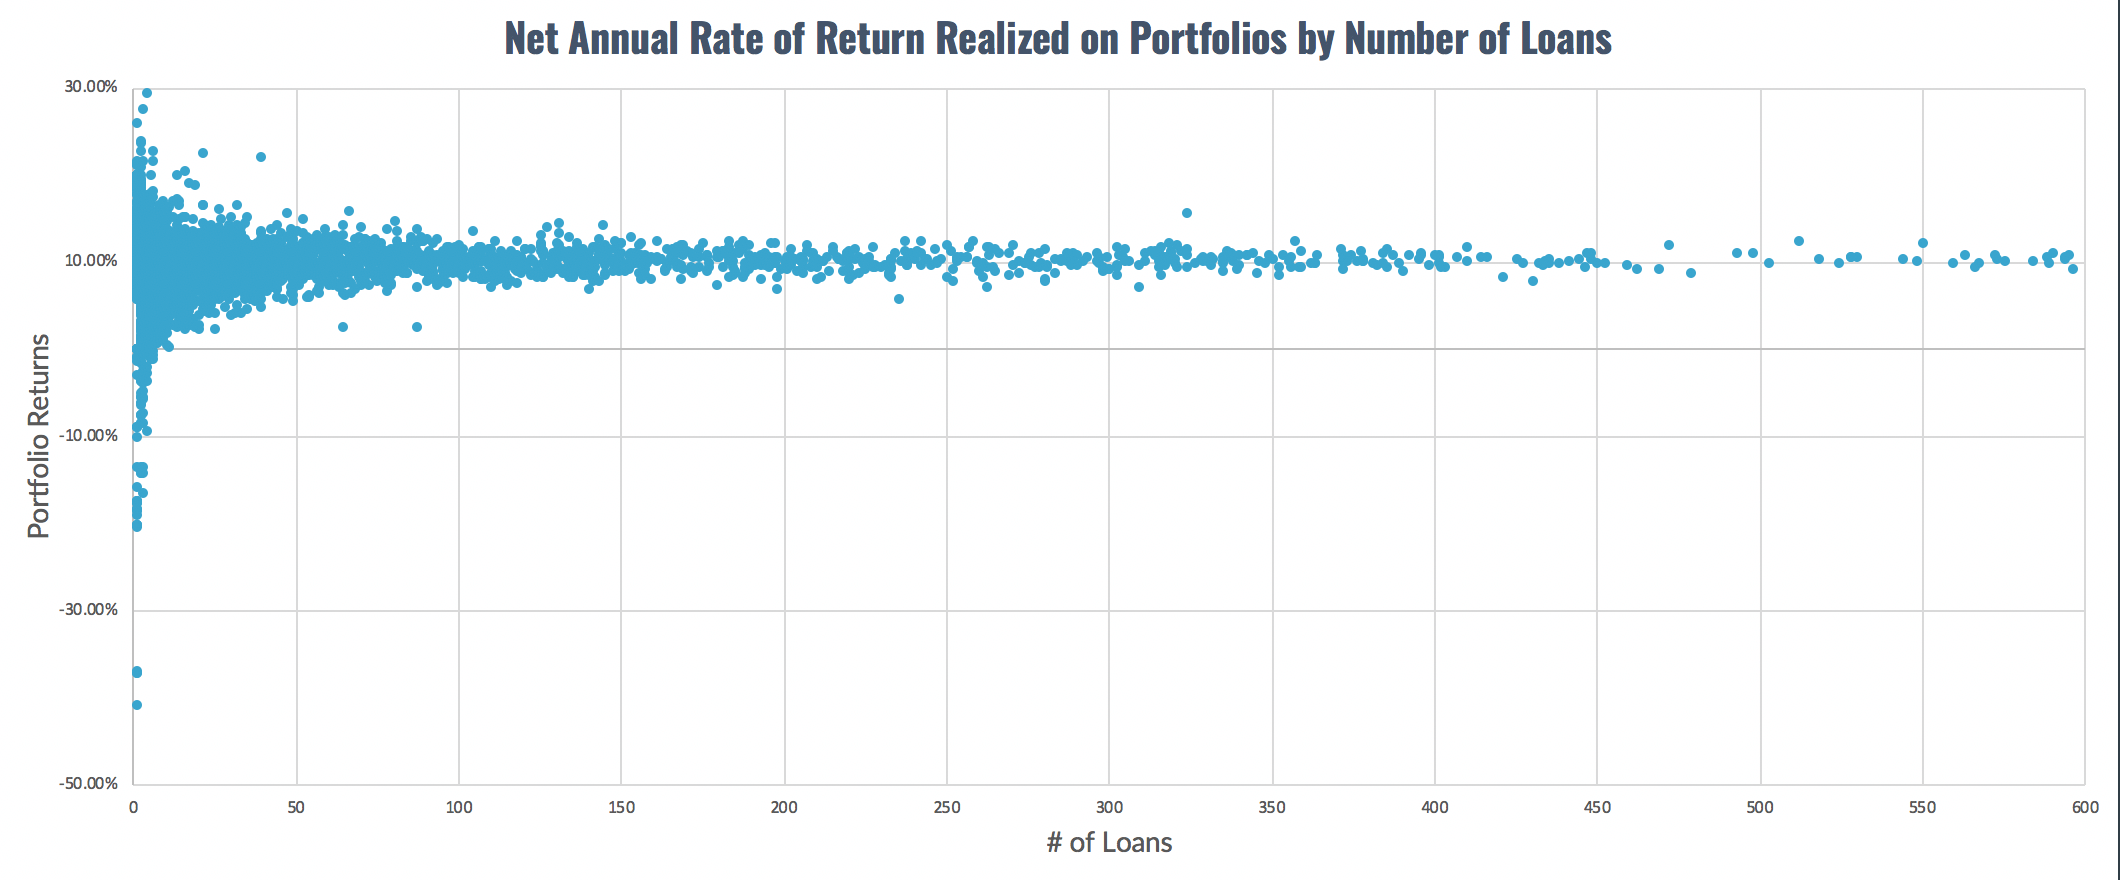 Net Annual Rate of Return Realized on Portfolios by Number of Loans - May 2020